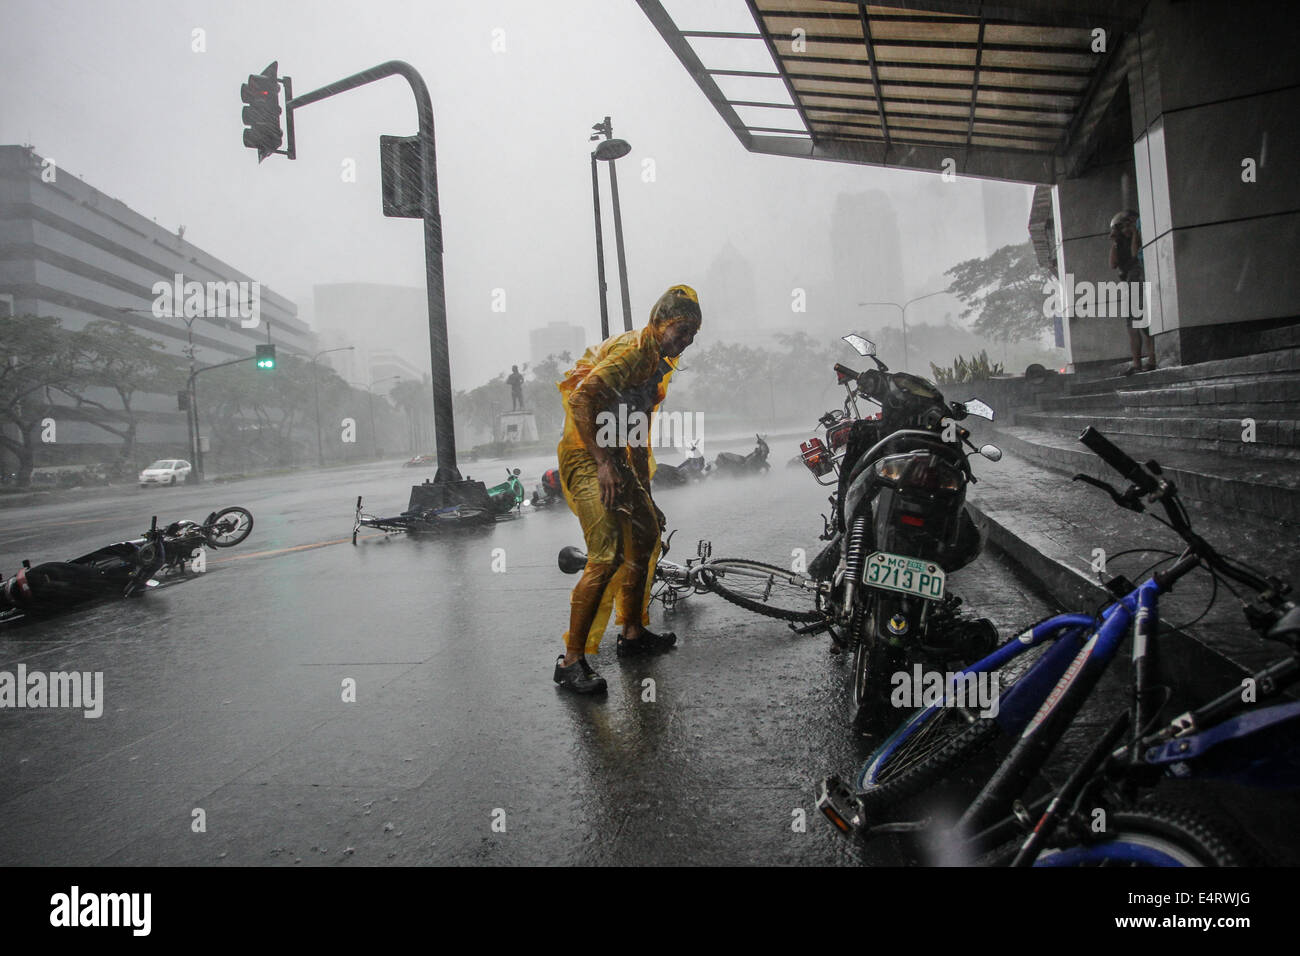 Manila, Philippines. 16th July, 2014. Makati City, Philippines - A man attempts to gain his balance after losing control of his bicycle caused by strong winds as Typhoon Rammasun hit Metro Manila on July 16, 2014. Typhoon Rammasun (locally known as Glenda) had maximum sustained winds of 150 kph and gustiness of up to 185 kph when it hit Metro Manila. Across the country, about 400,000 people had fled their homes and sheltered in evacuation centers, according to the disaster management council. Credit:  ZUMA Press, Inc./Alamy Live News Stock Photo